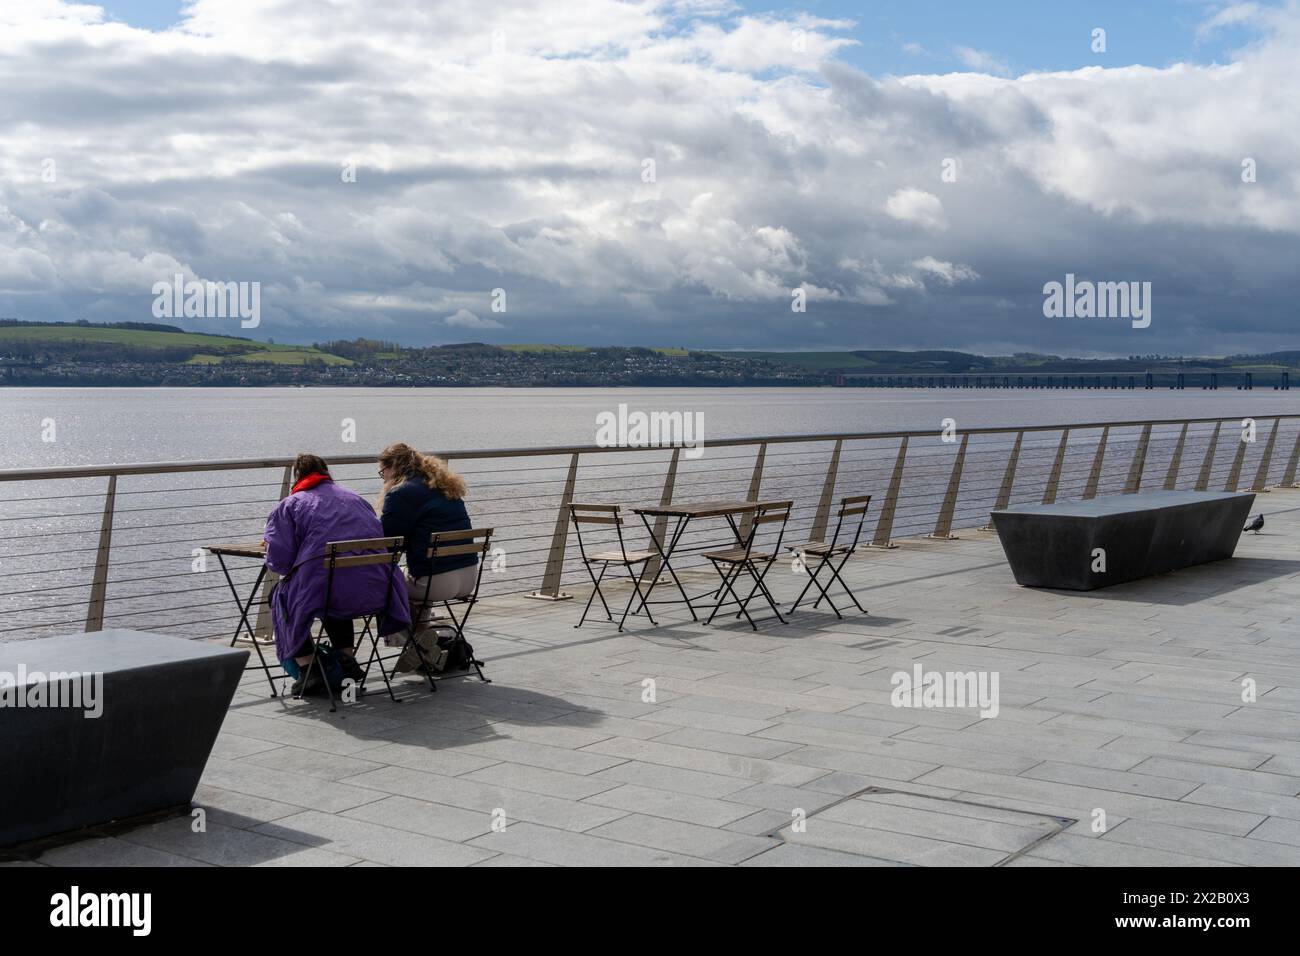 Two people sit at an outdoor table overlooking the River Tay estuary in Dundee, Scotland, UK. Concept of modern city lifestyle, urban living Stock Photo